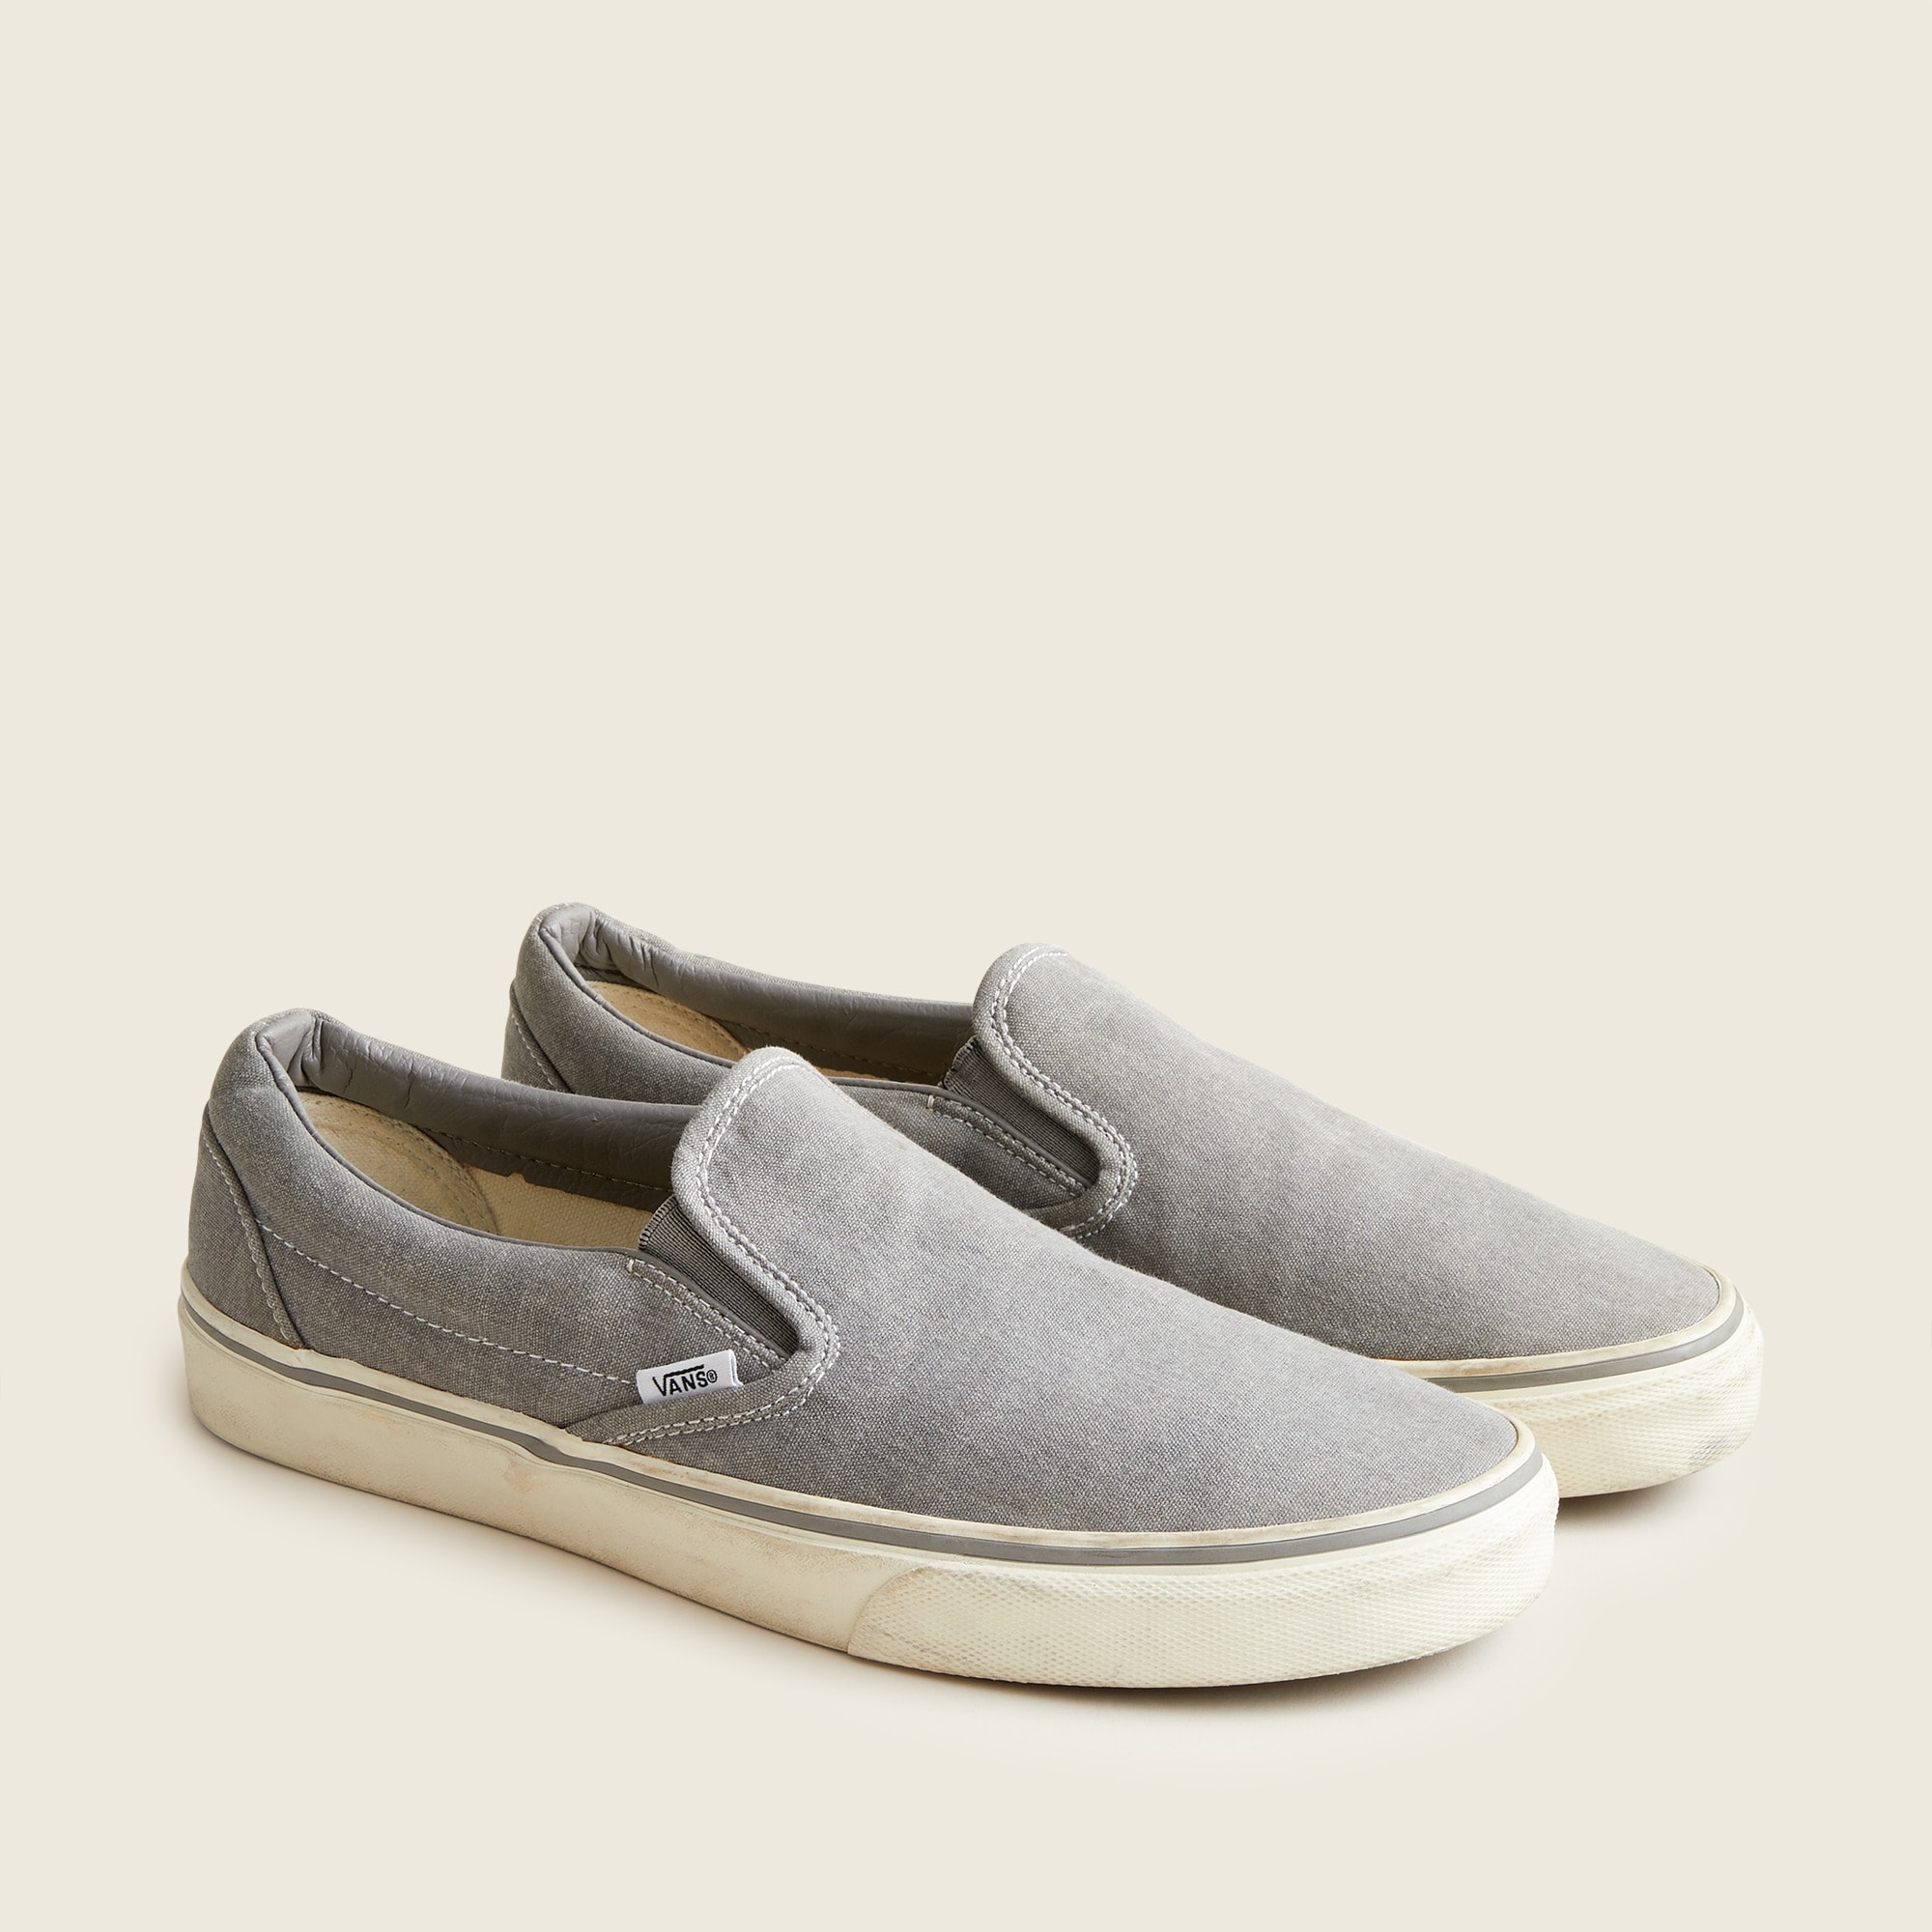 vans for j crew washed canvas